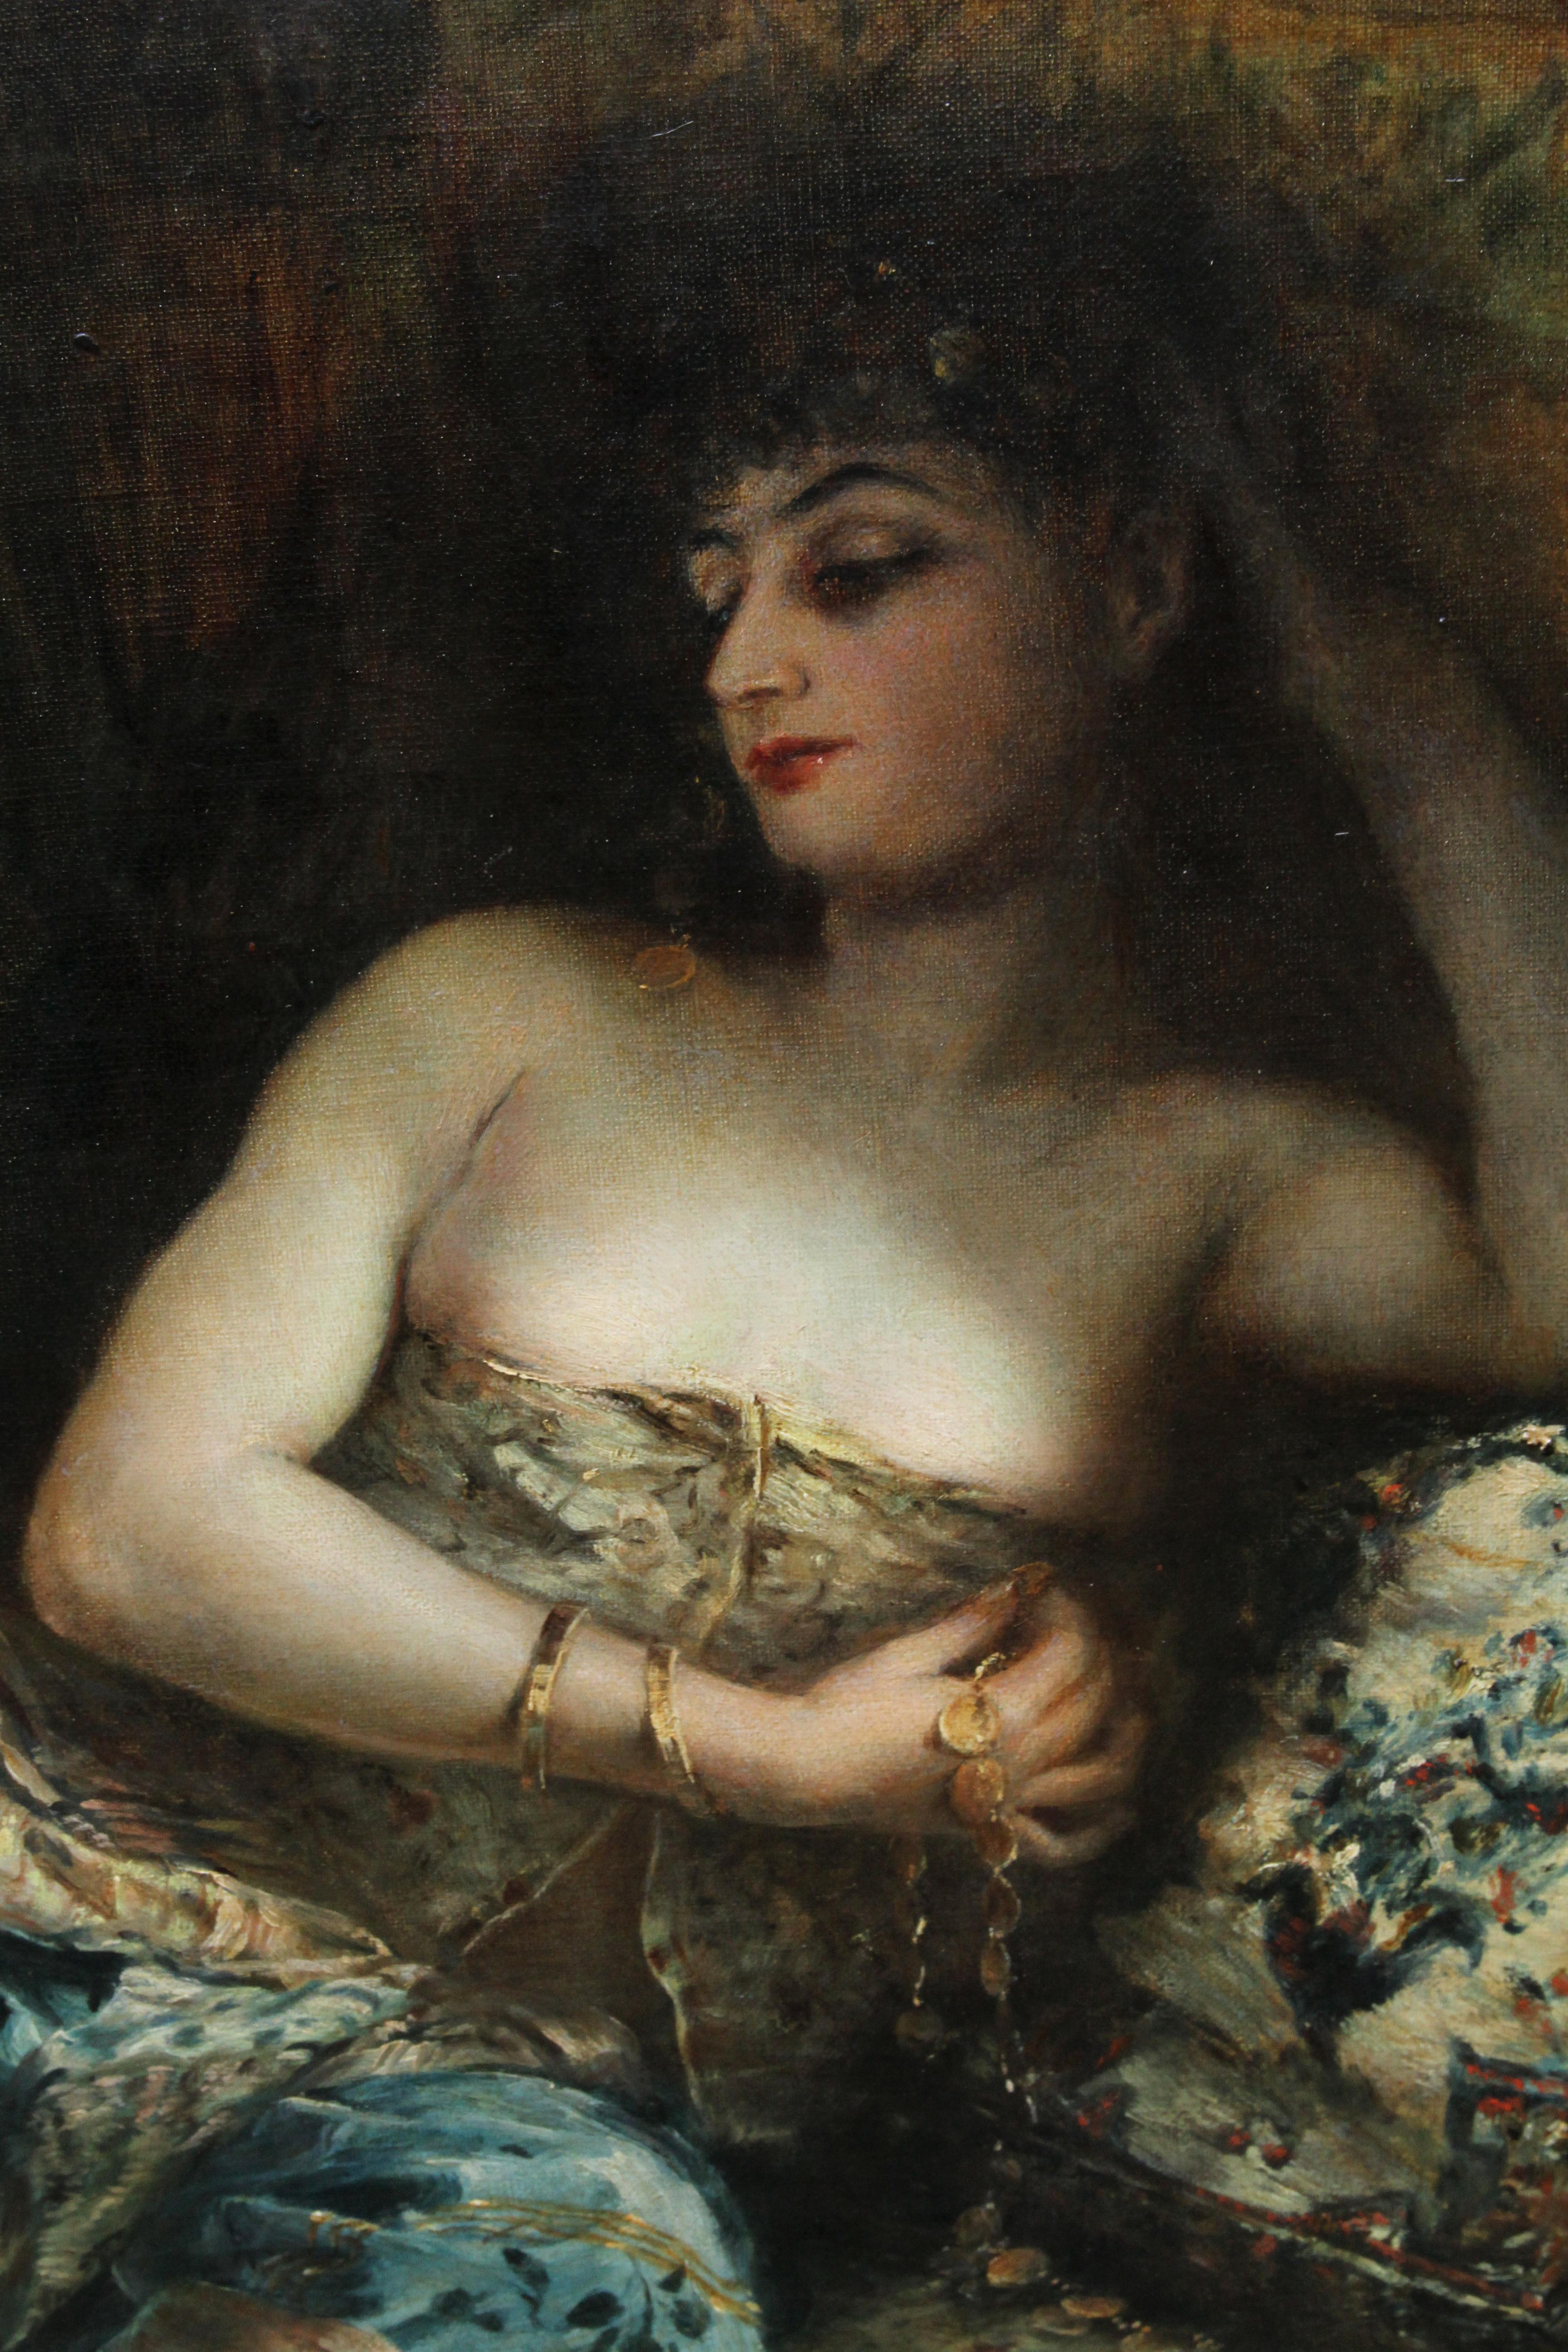 Odalisque - Woman in a Harem - French 1900 Orientalist art portrait oil painting For Sale 2